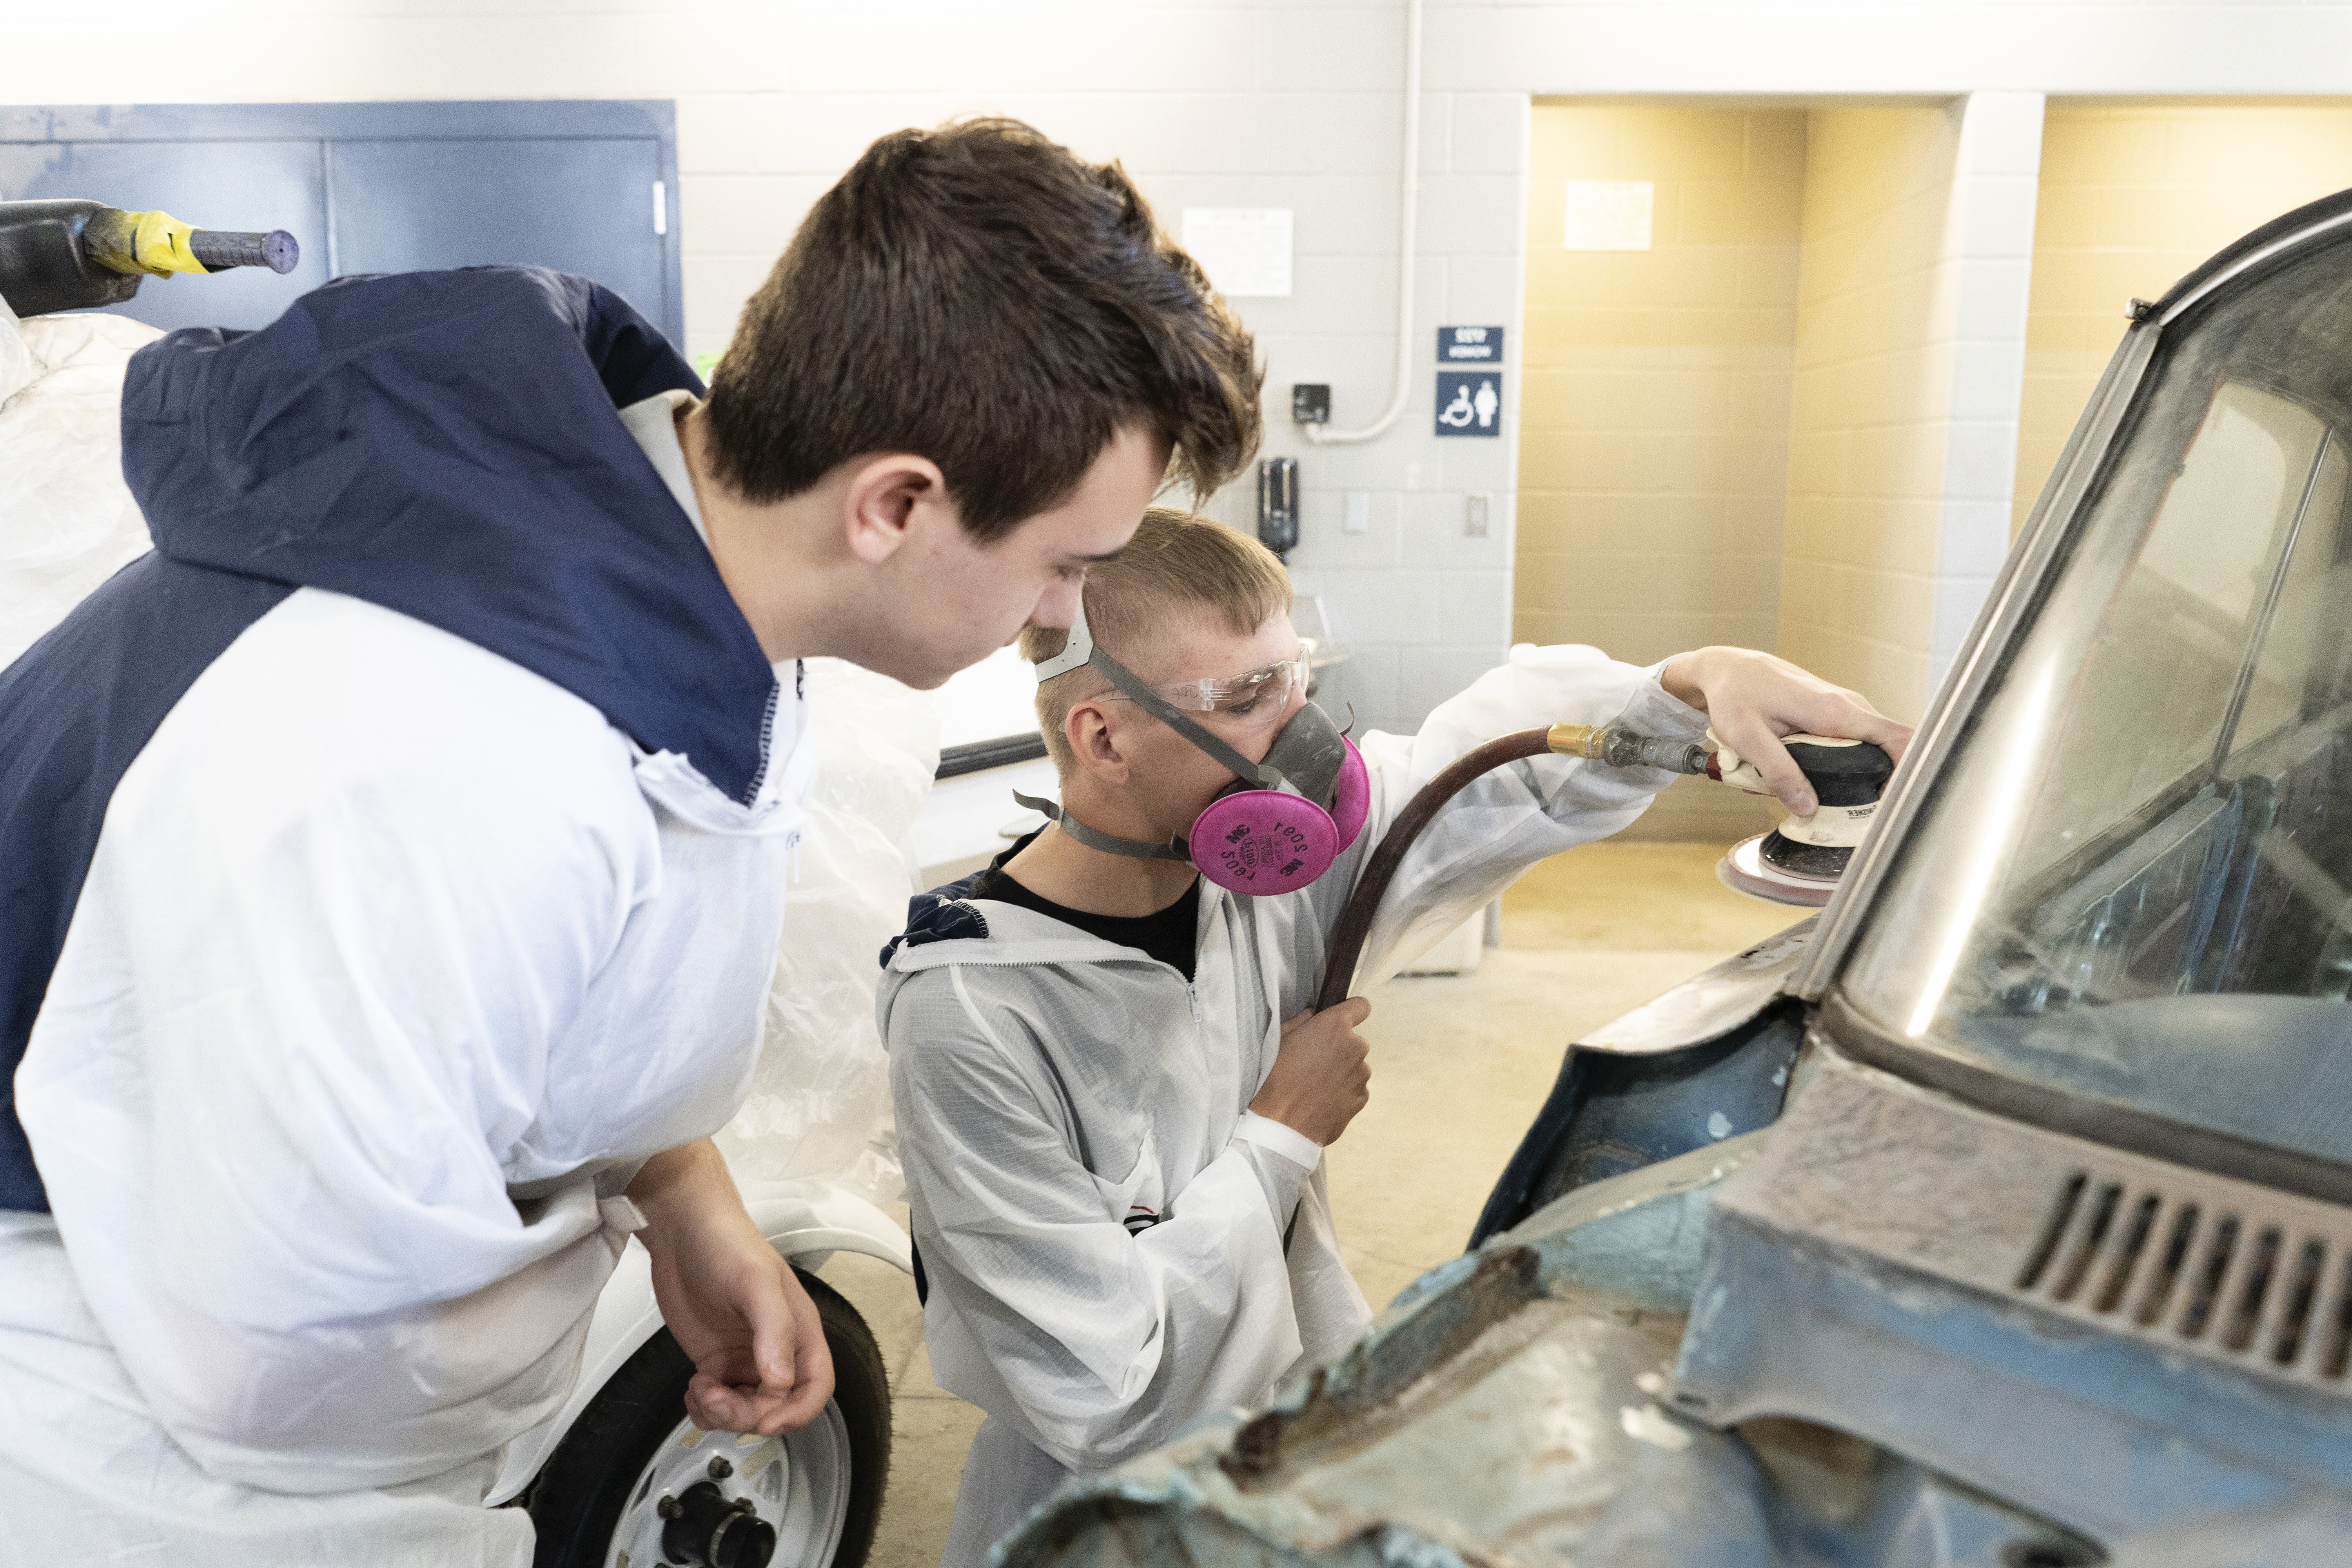 Two white male students are sanding a fender